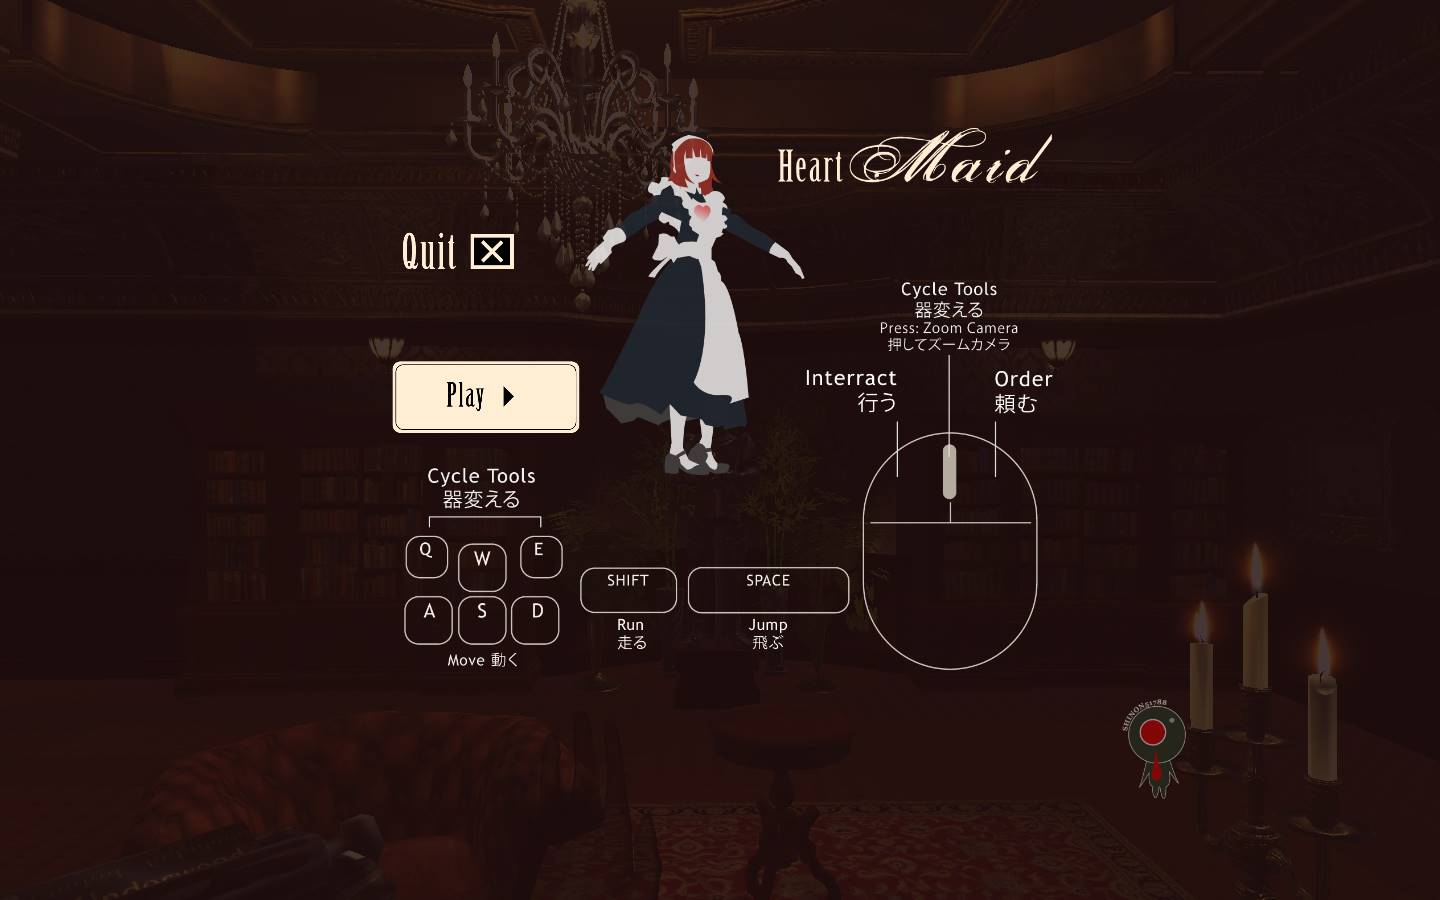 heartbeat - heart maid mansion - video 2